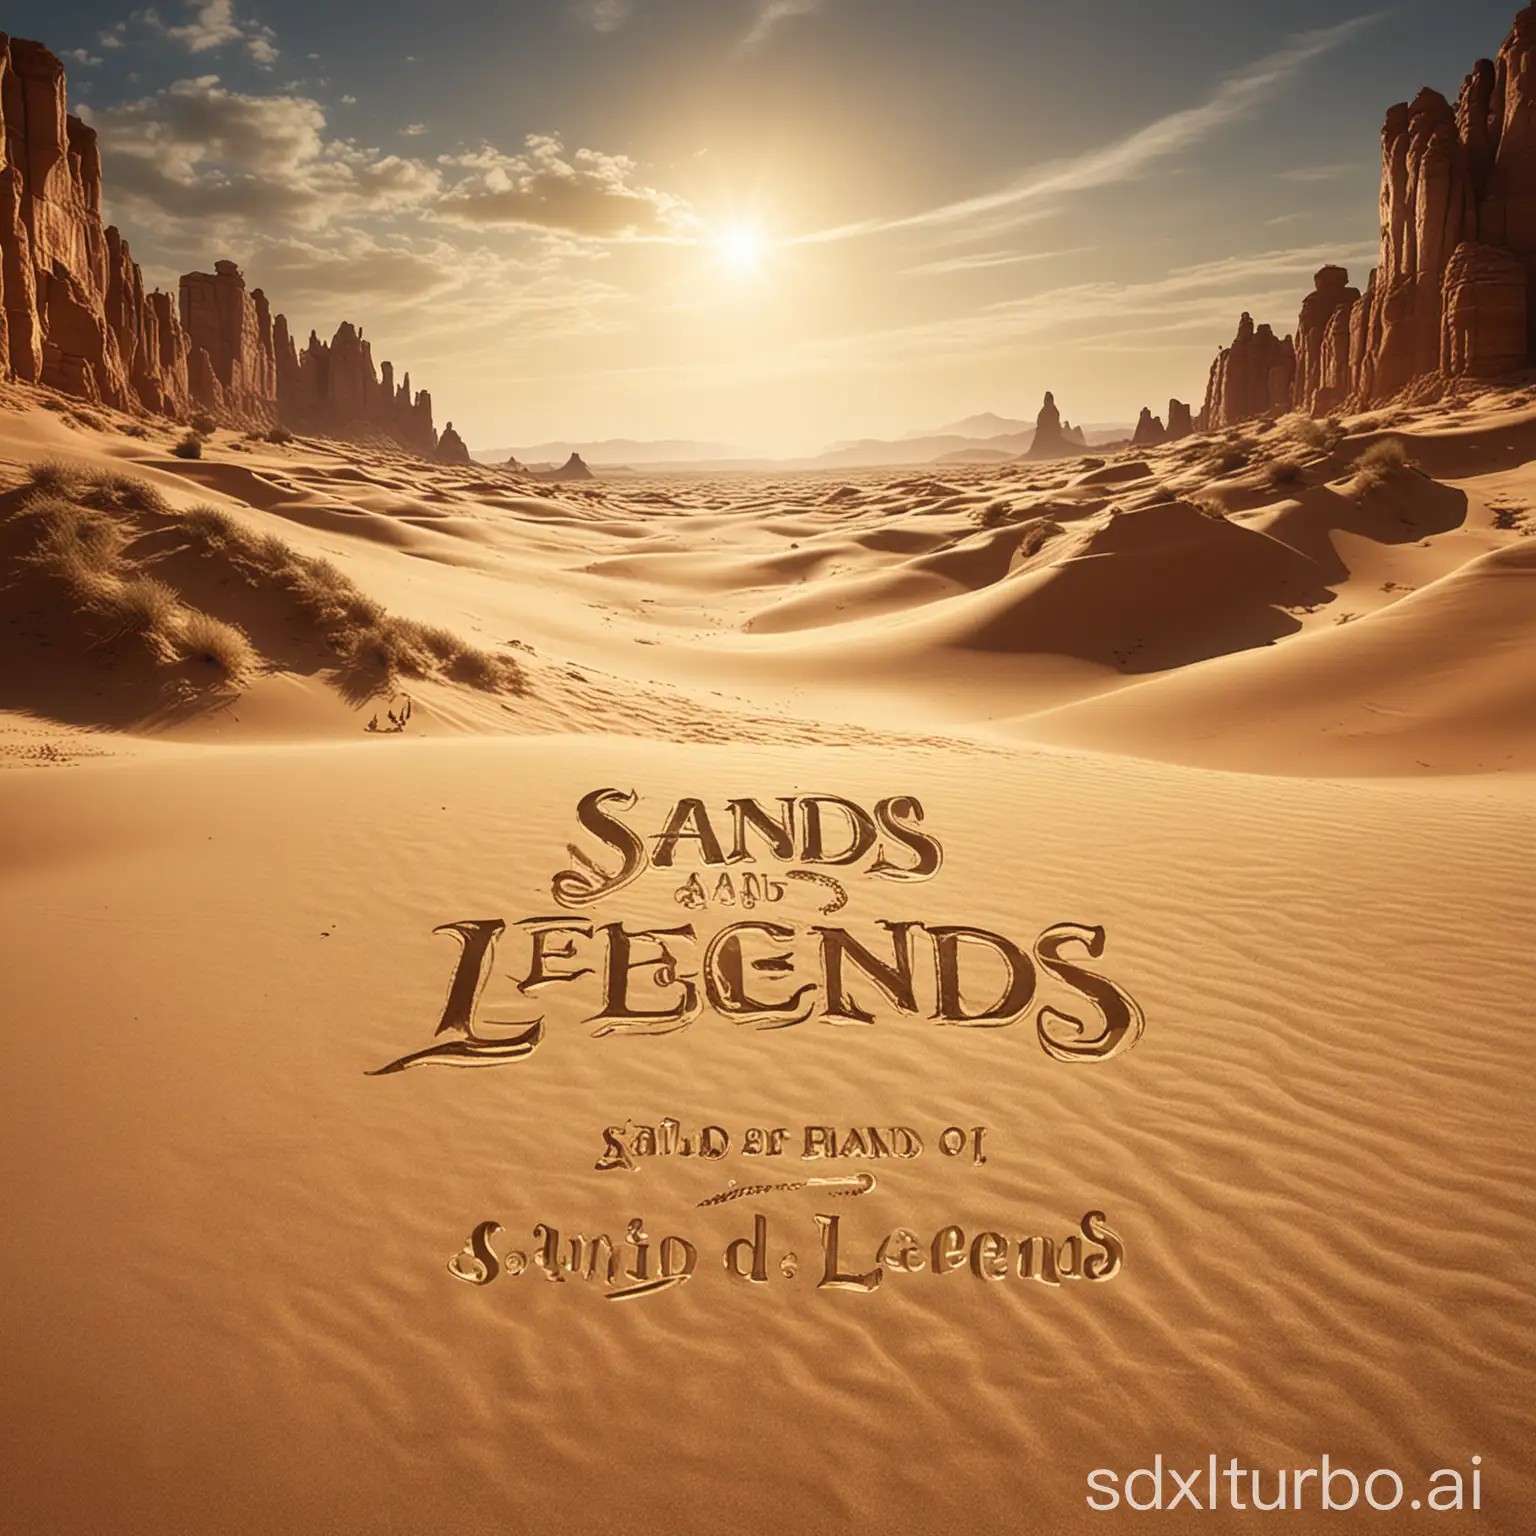 Sands and Legends